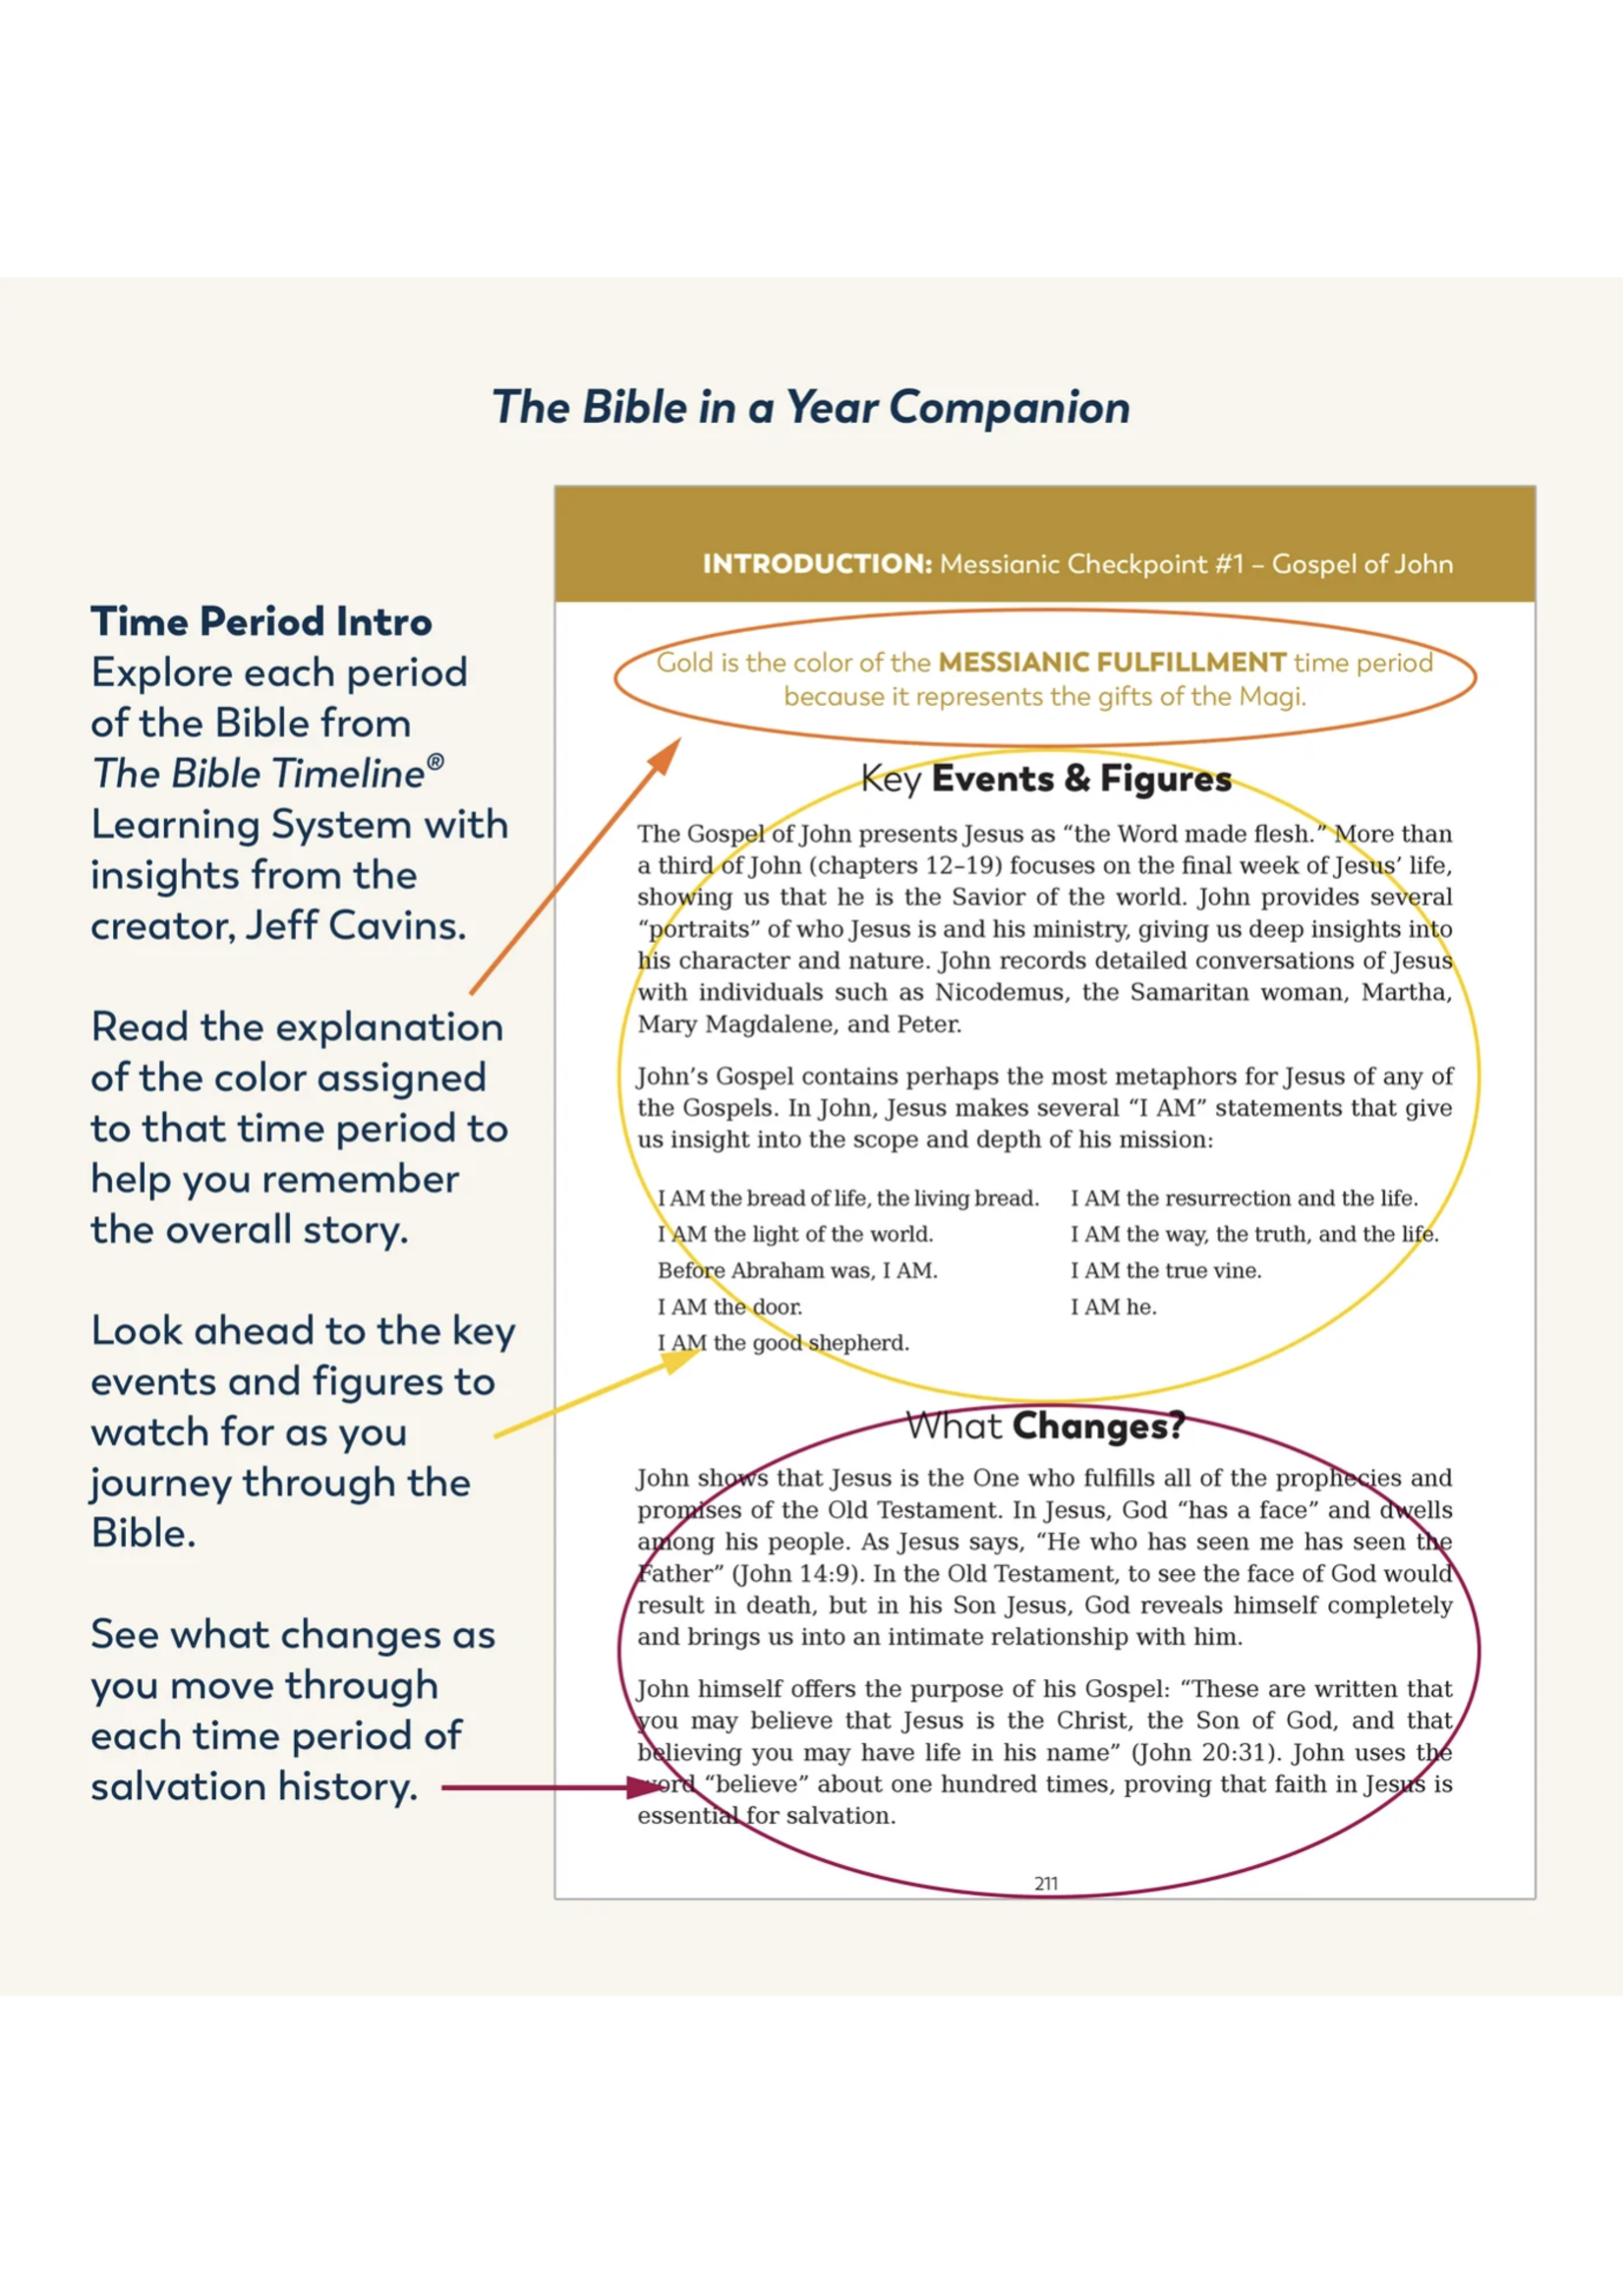 Bible in a Year Companion, Volume I